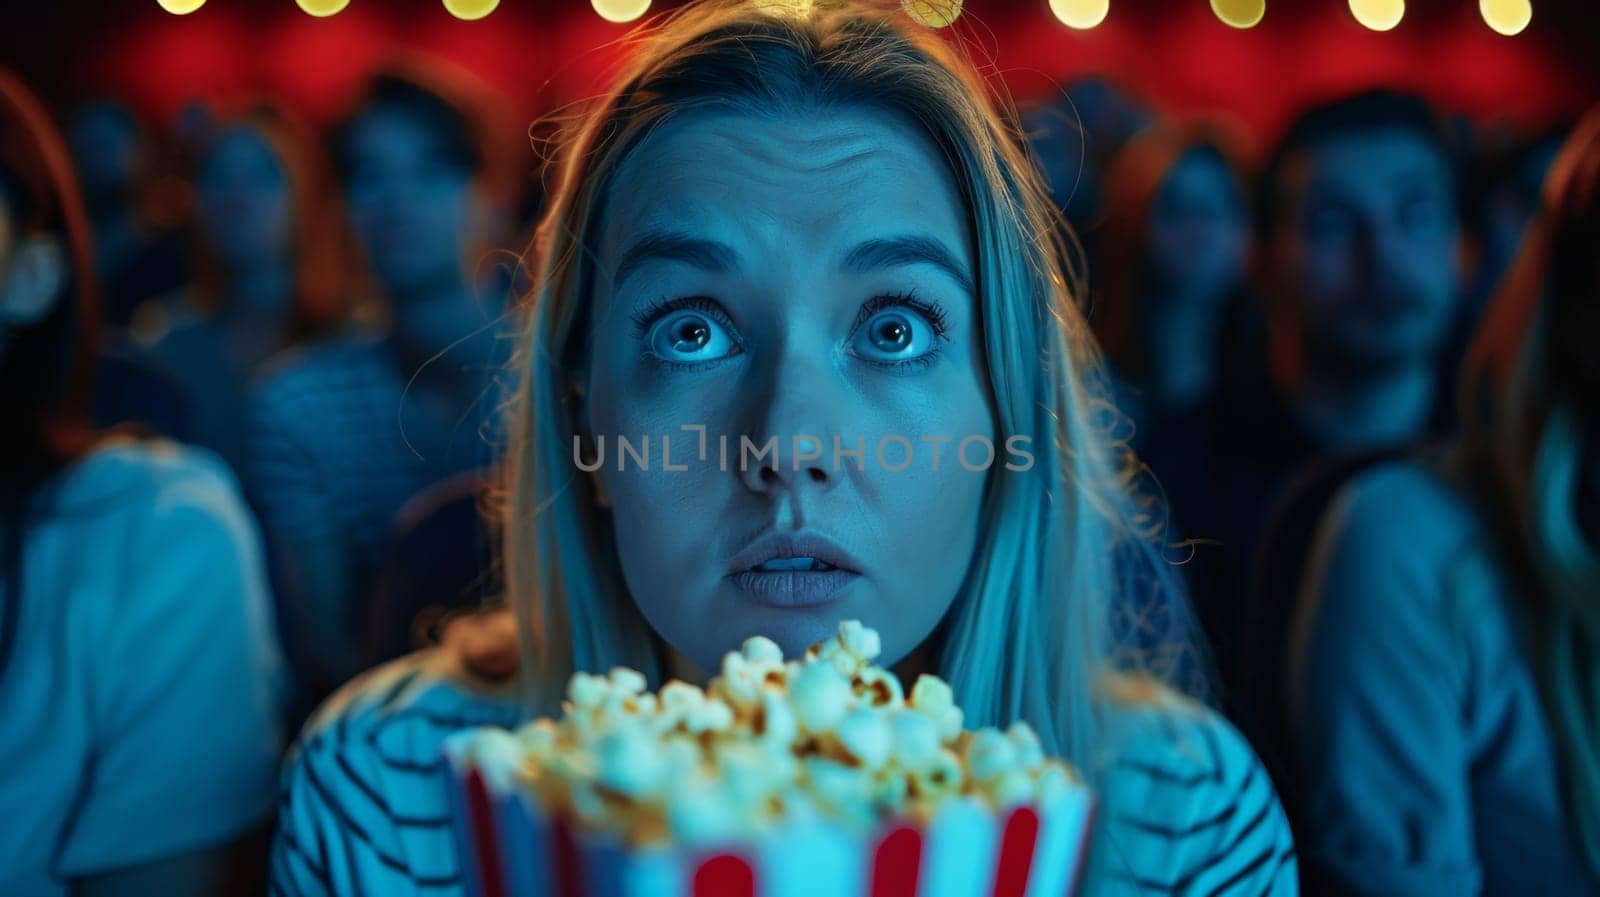 Headshot of a frightened woman holding a popcorn in a cinema watching a movie by papatonic